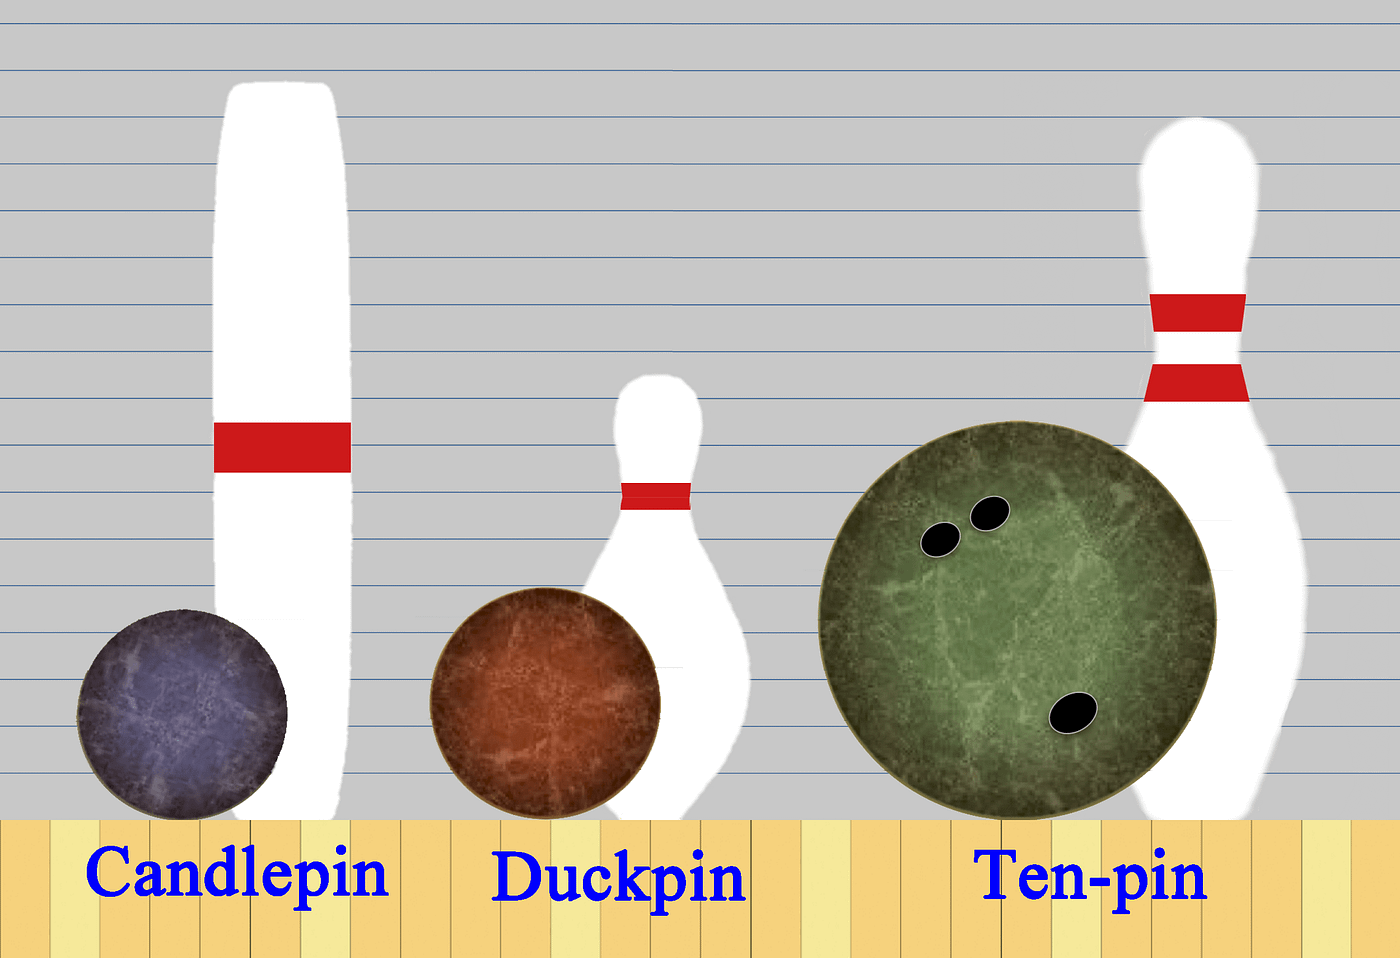 Duckpins? Candlepins? Let's Go Bowling!